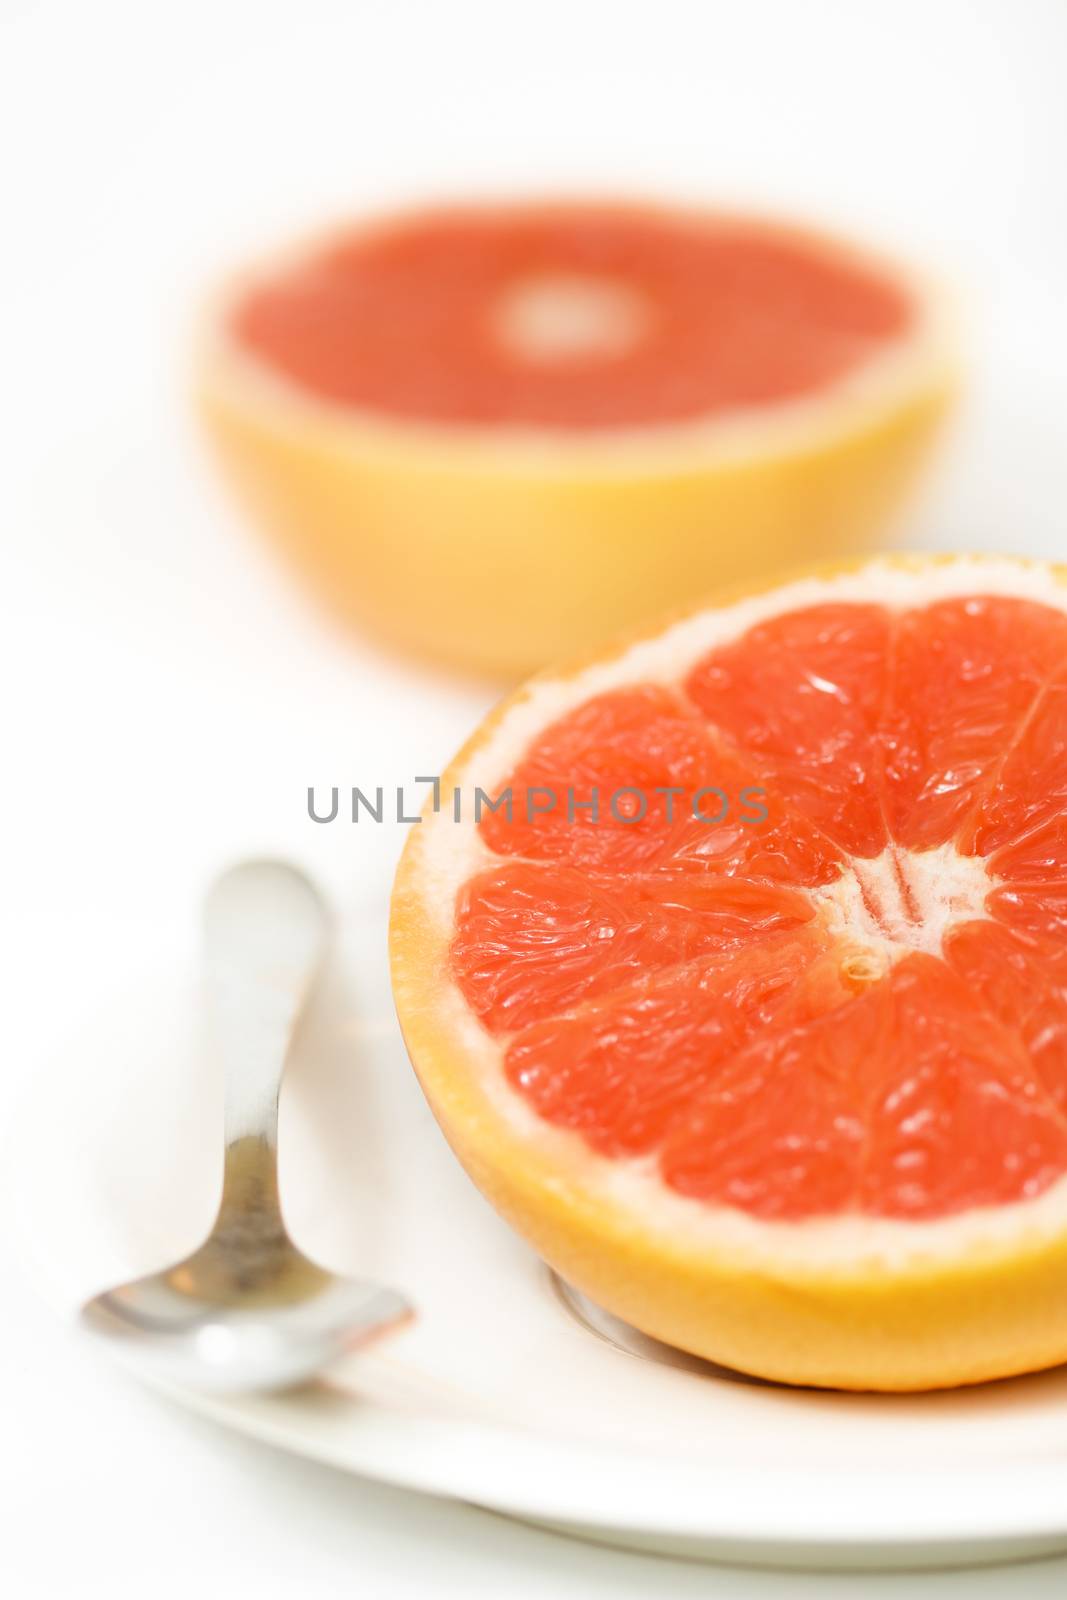 Halved red grapefruit on the plate